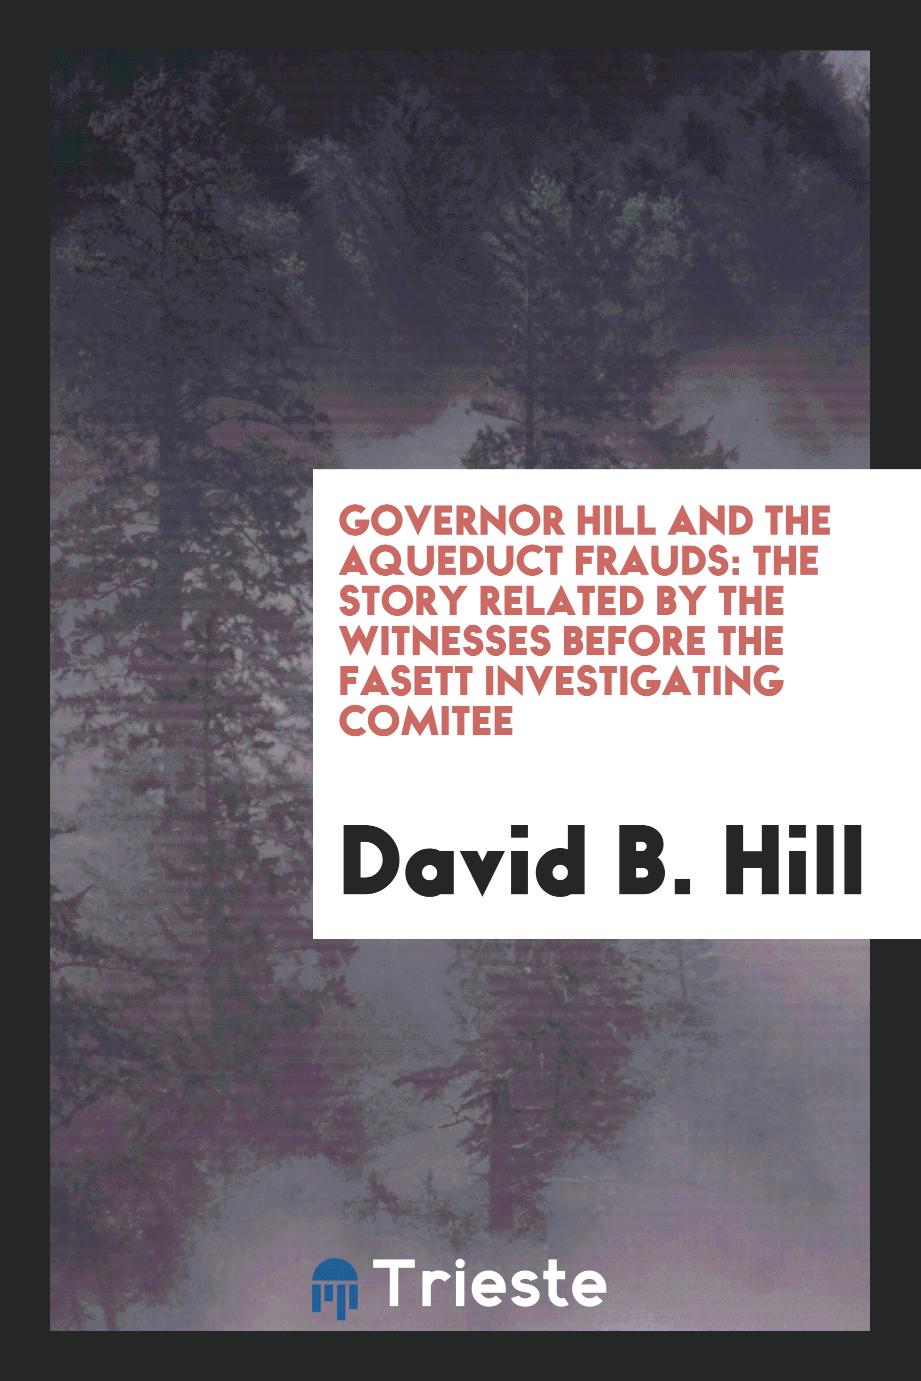 Governor Hill and the Aqueduct Frauds: The Story Related by the Witnesses before the Fasett Investigating Comitee